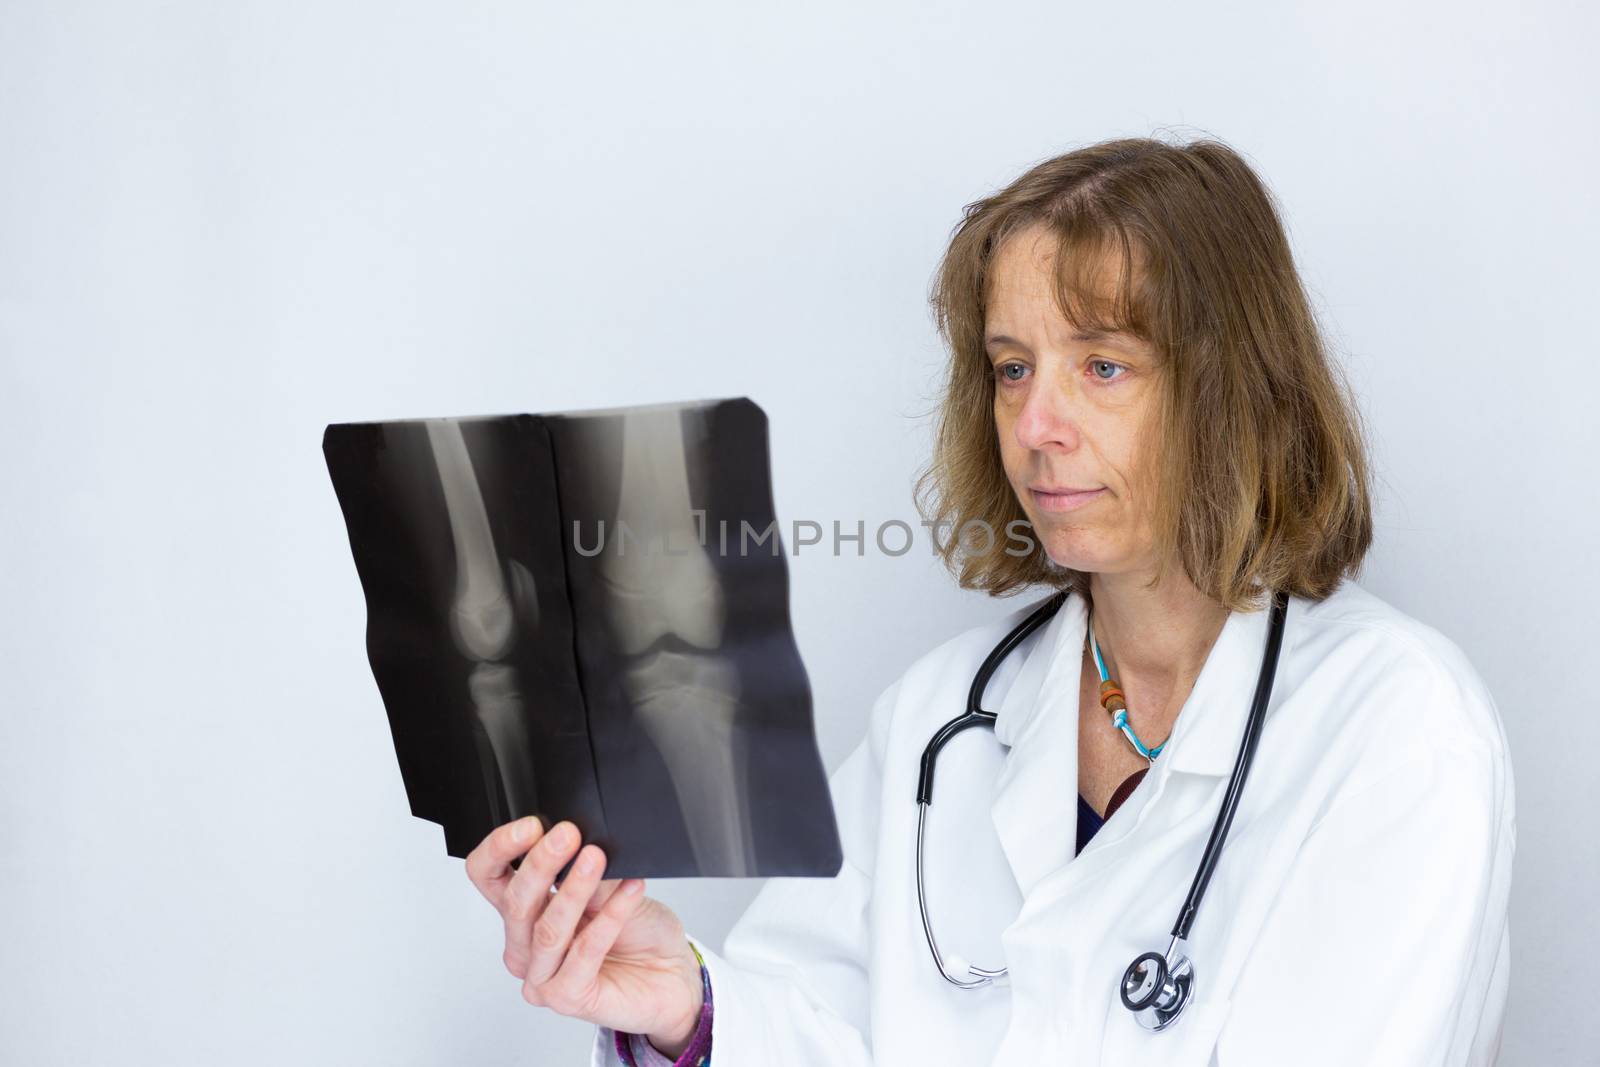 Dutch female doctor looking at X-ray photo by BenSchonewille